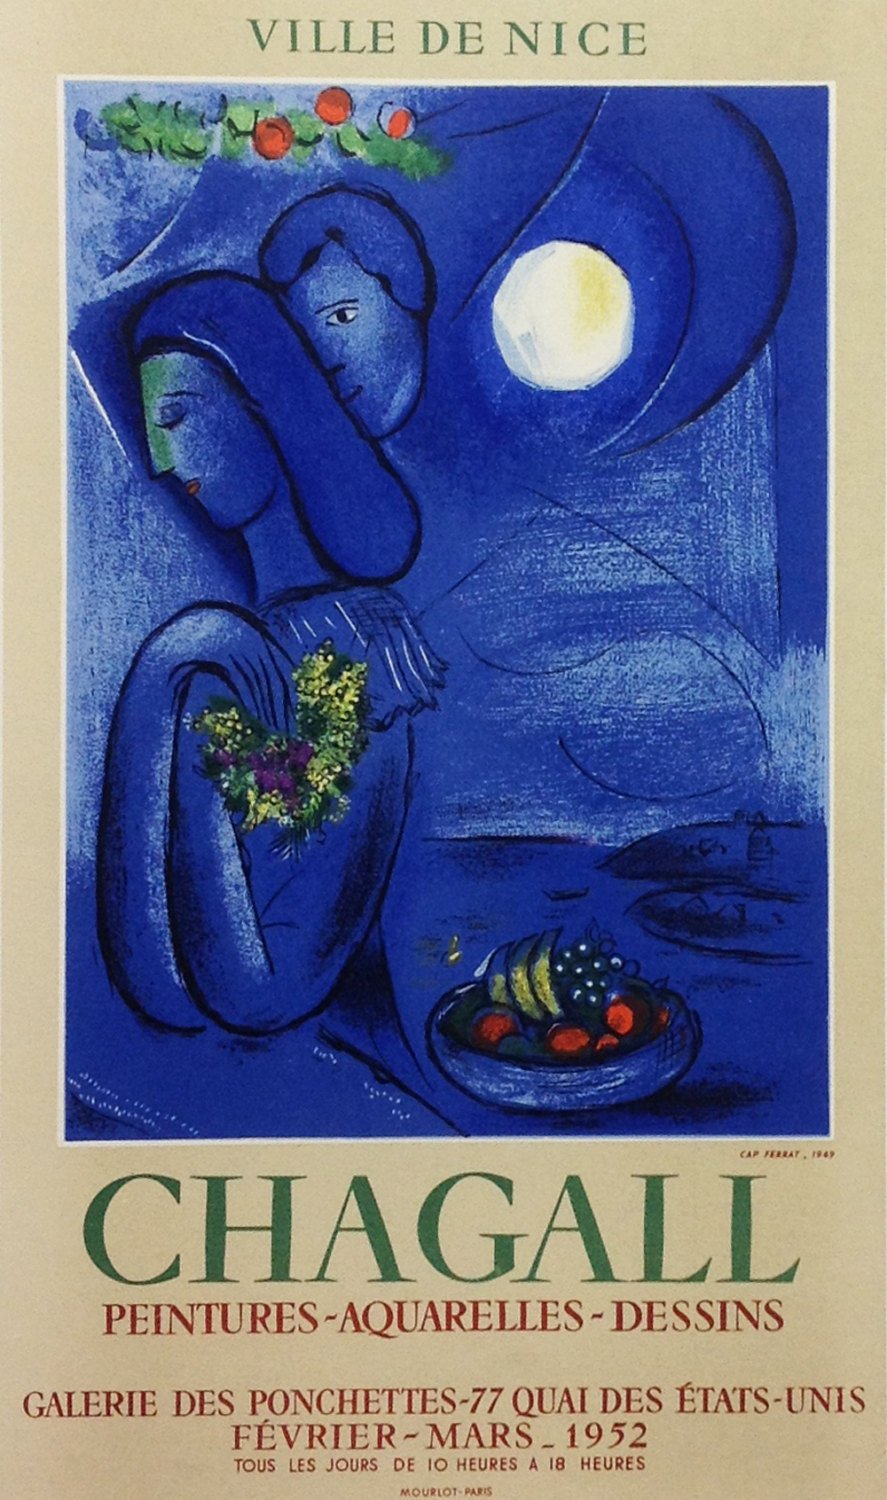 Chagall Lithograph 17, Ville de Nice, Art in Posters